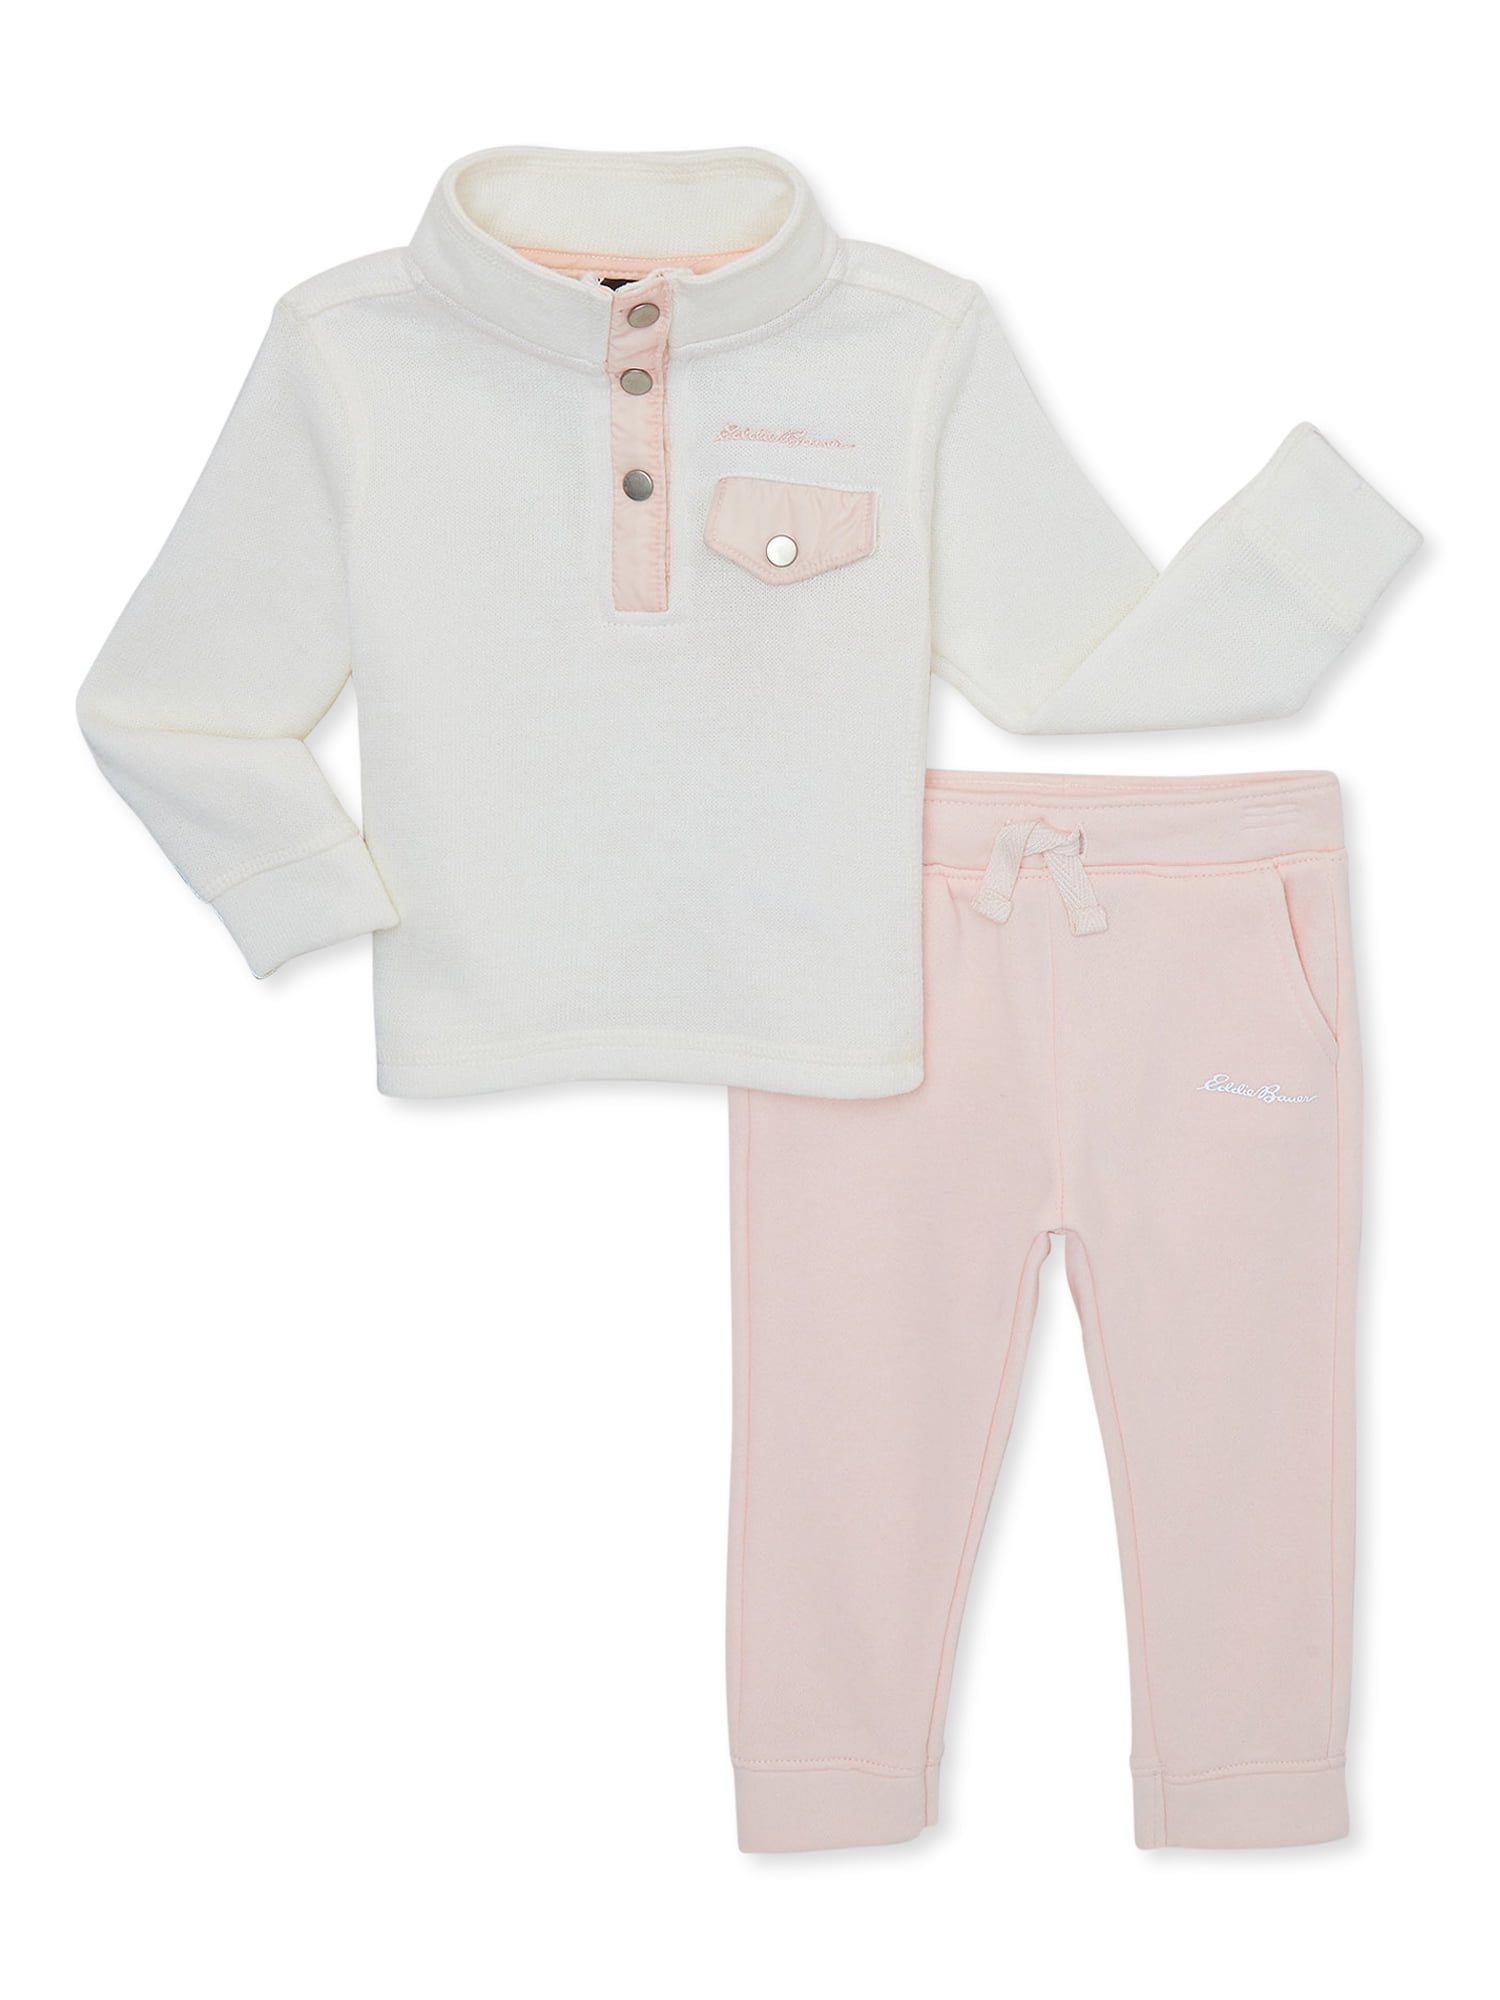 Eddie Bauer Baby Girl Fleece Top & Jogger 2 Pc Outfit Set, Sizes 12 ...